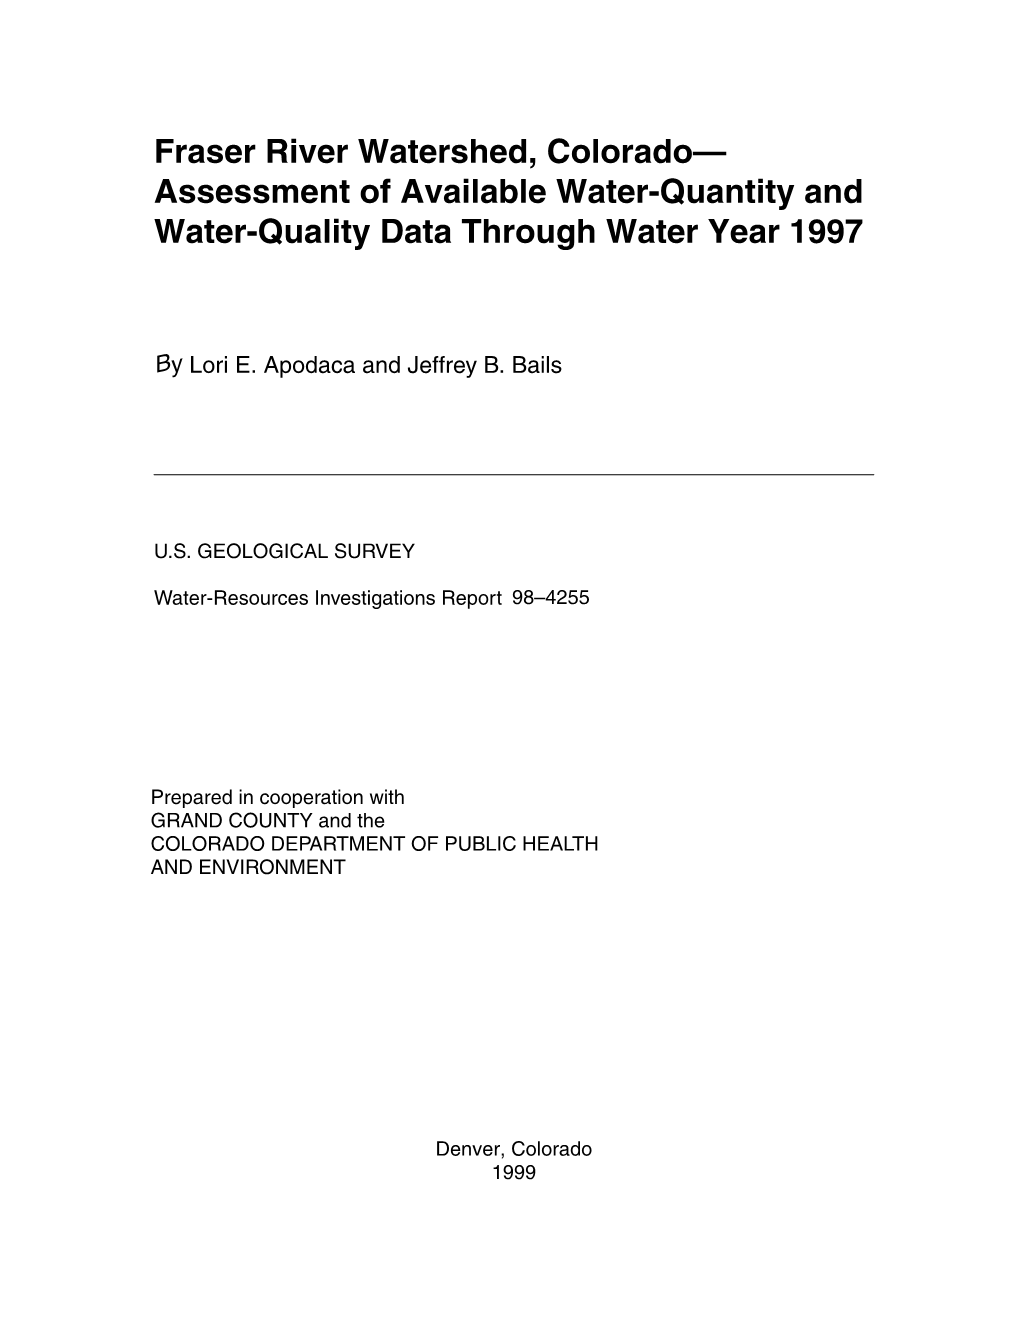 Fraser River Watershed, Colorado— Assessment of Available Water-Quantity and Water-Quality Data Through Water Year 1997